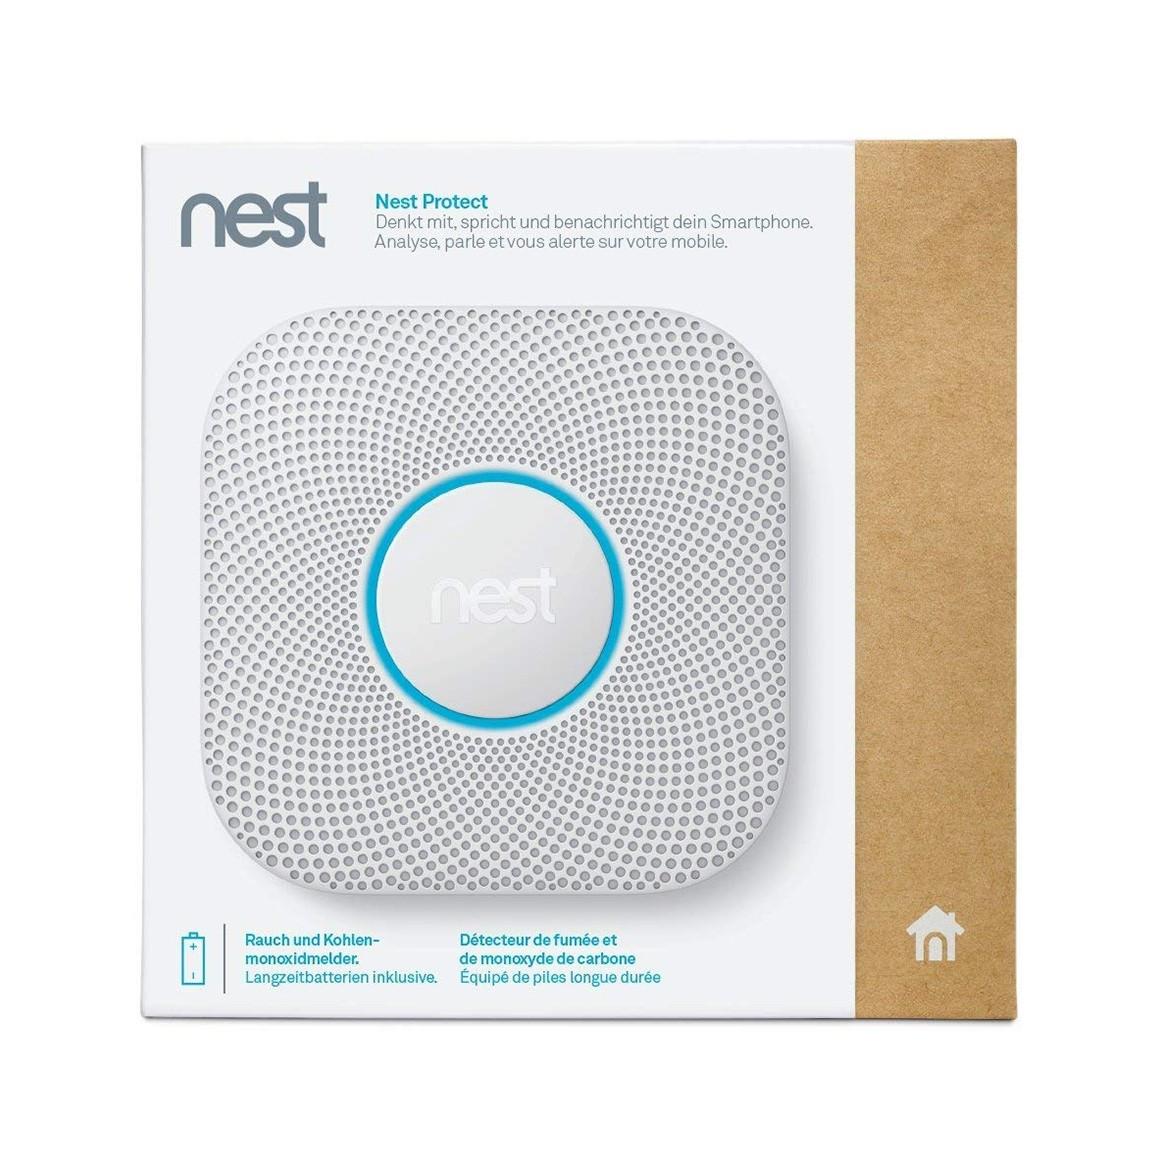 Nest Protect Verpackung